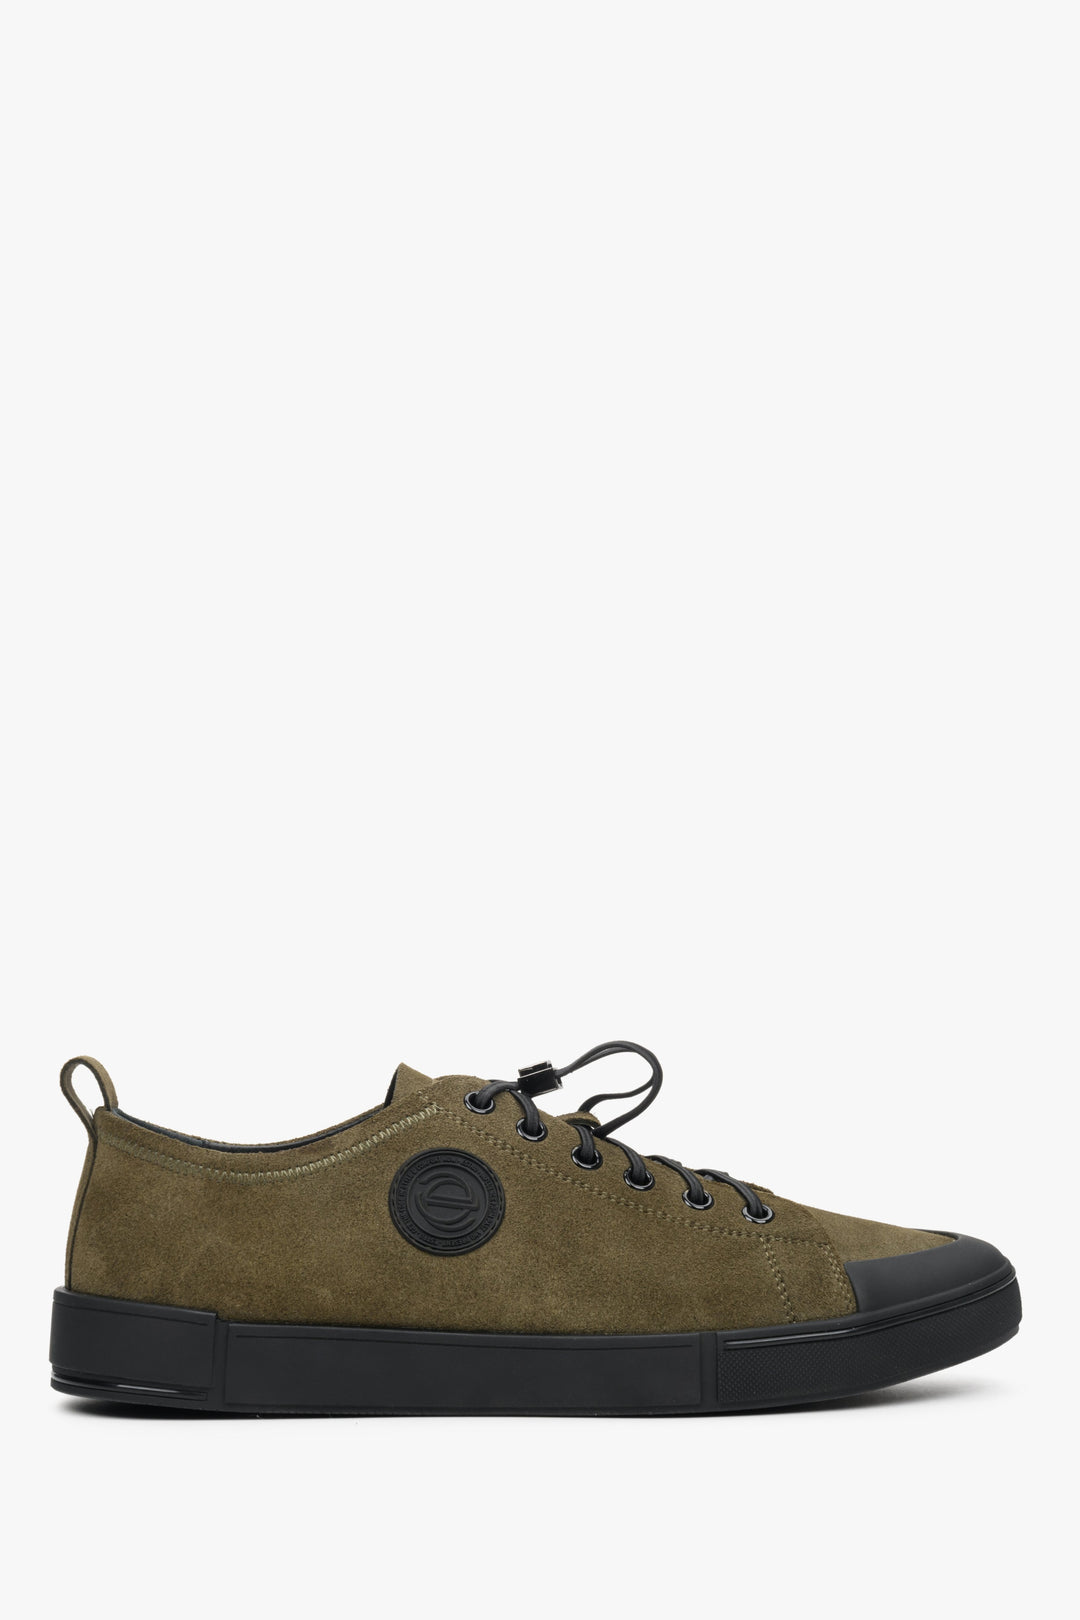 Men's Green Sneakers made of Genuine Leather for Fall Estro ER00112636.